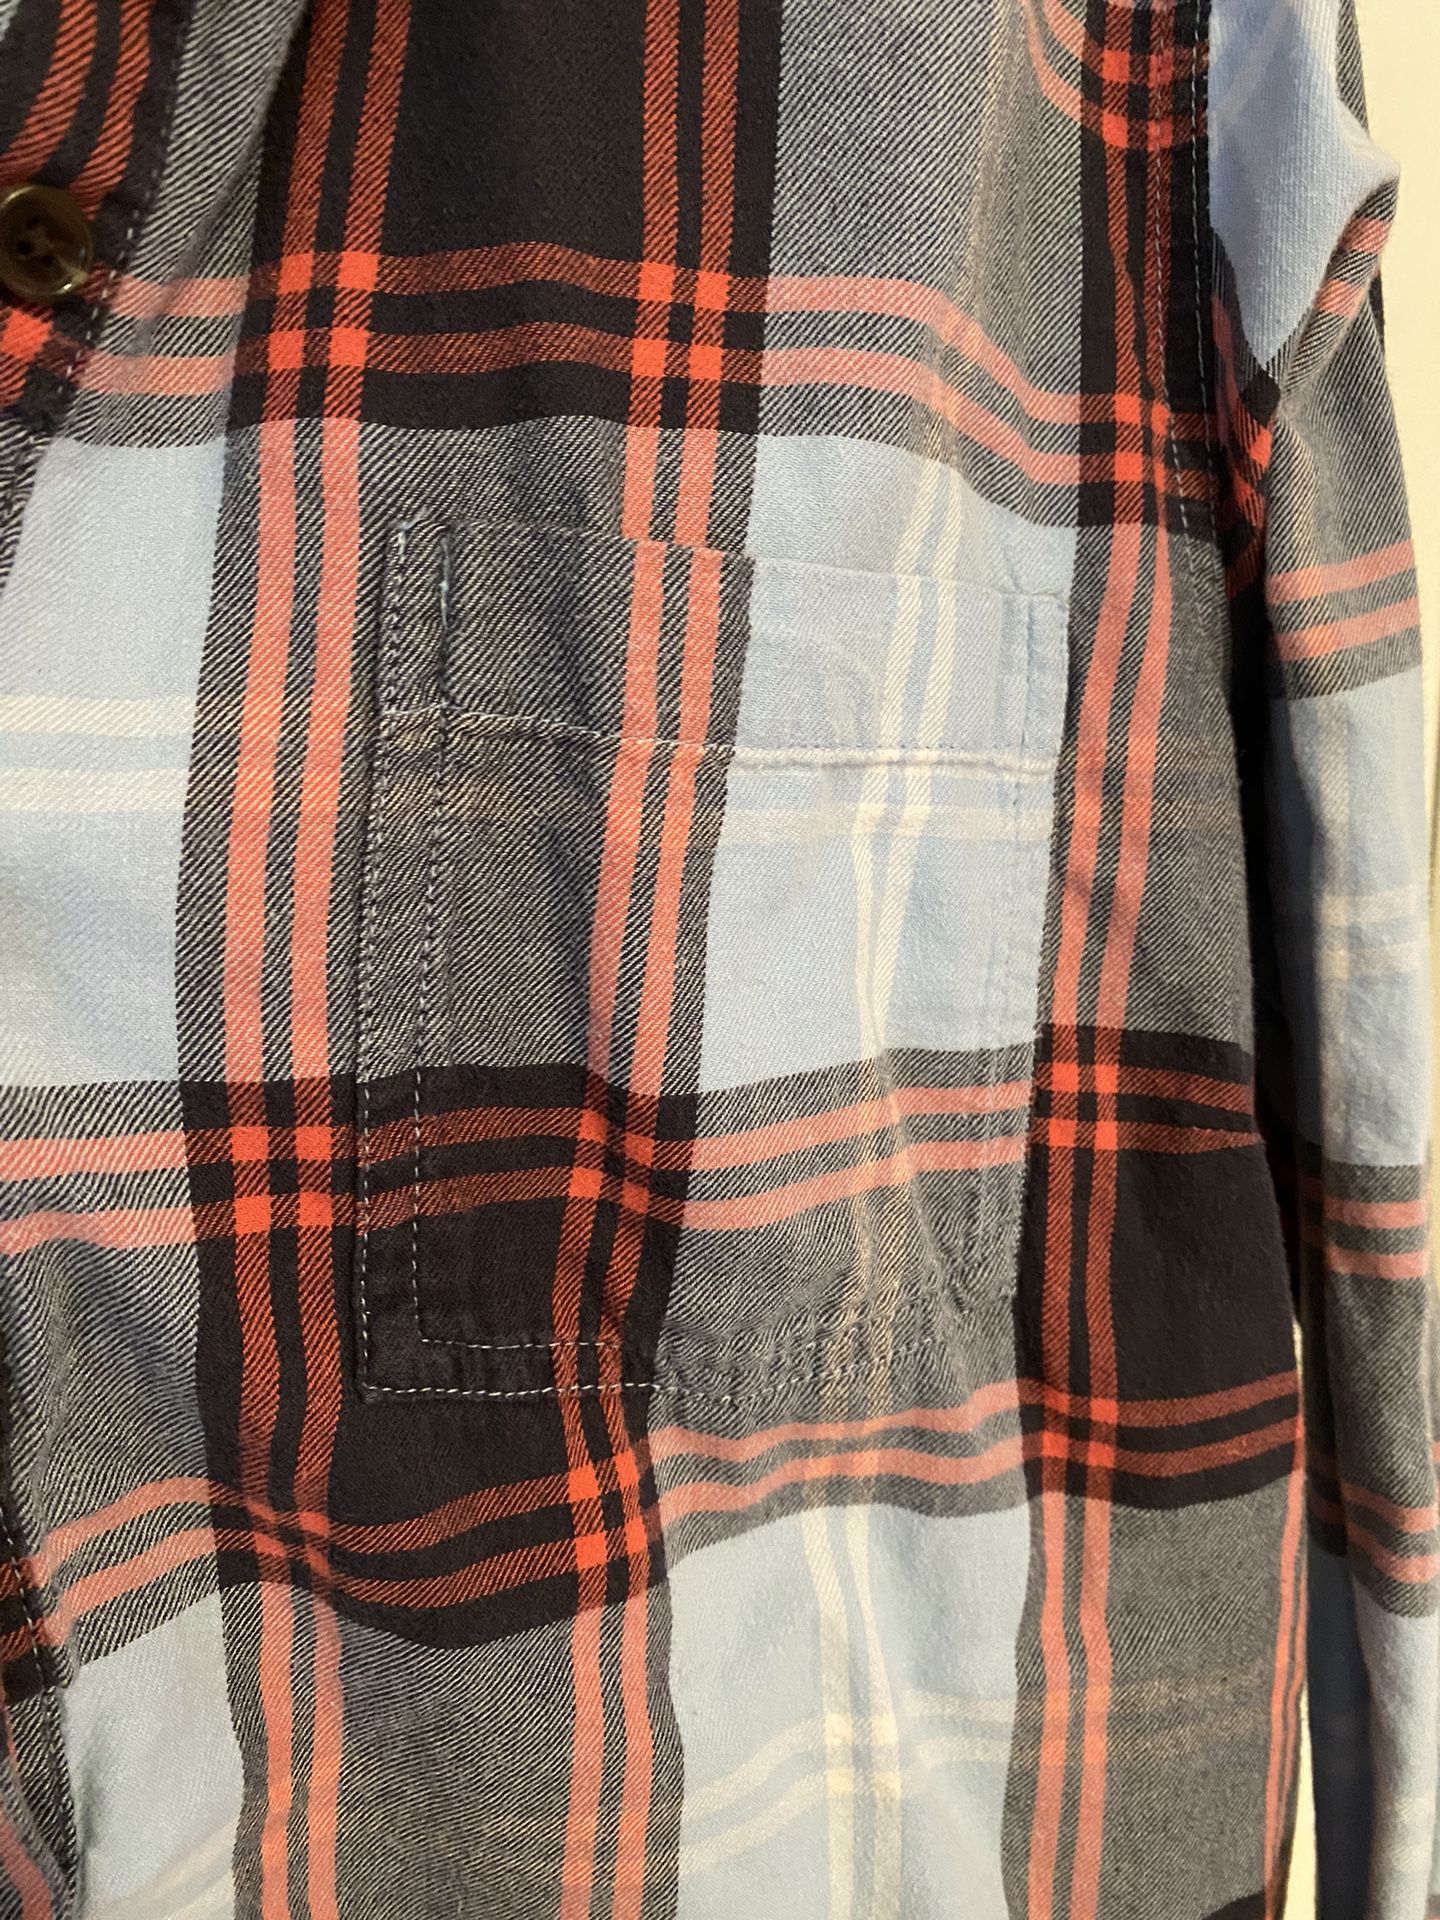 Size XL plaid flannel tunic  Buttons half way down  From Old Navy